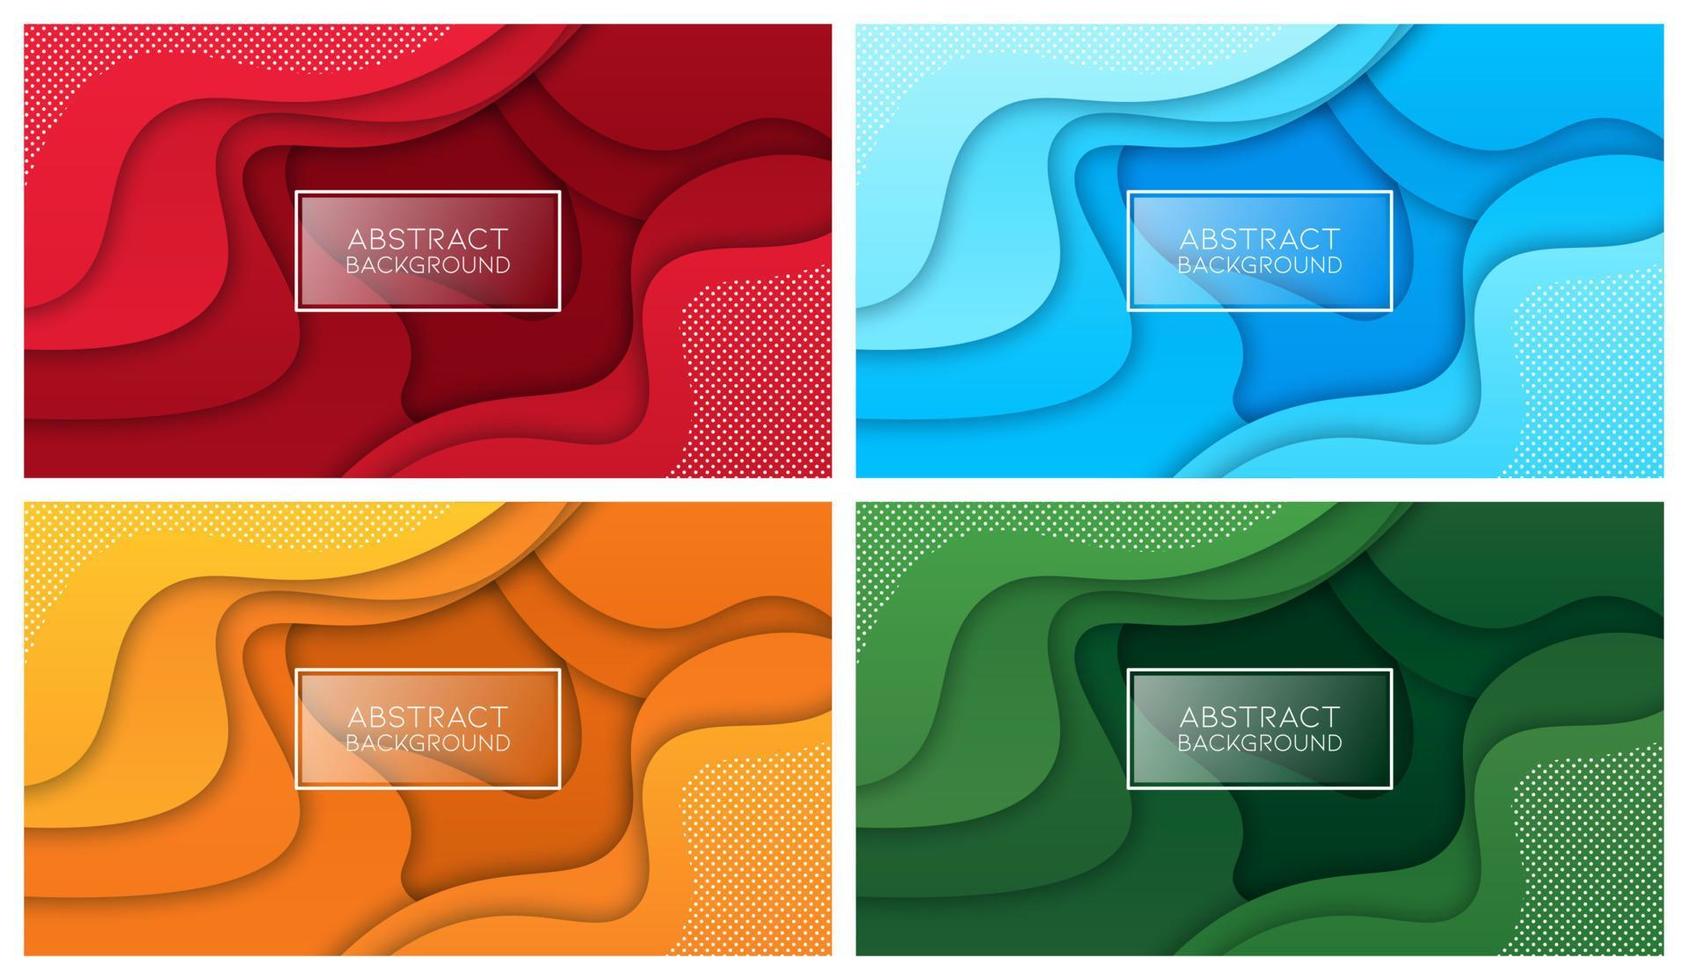 Colorful liquid and geometric background with fluid gradient shapes vector